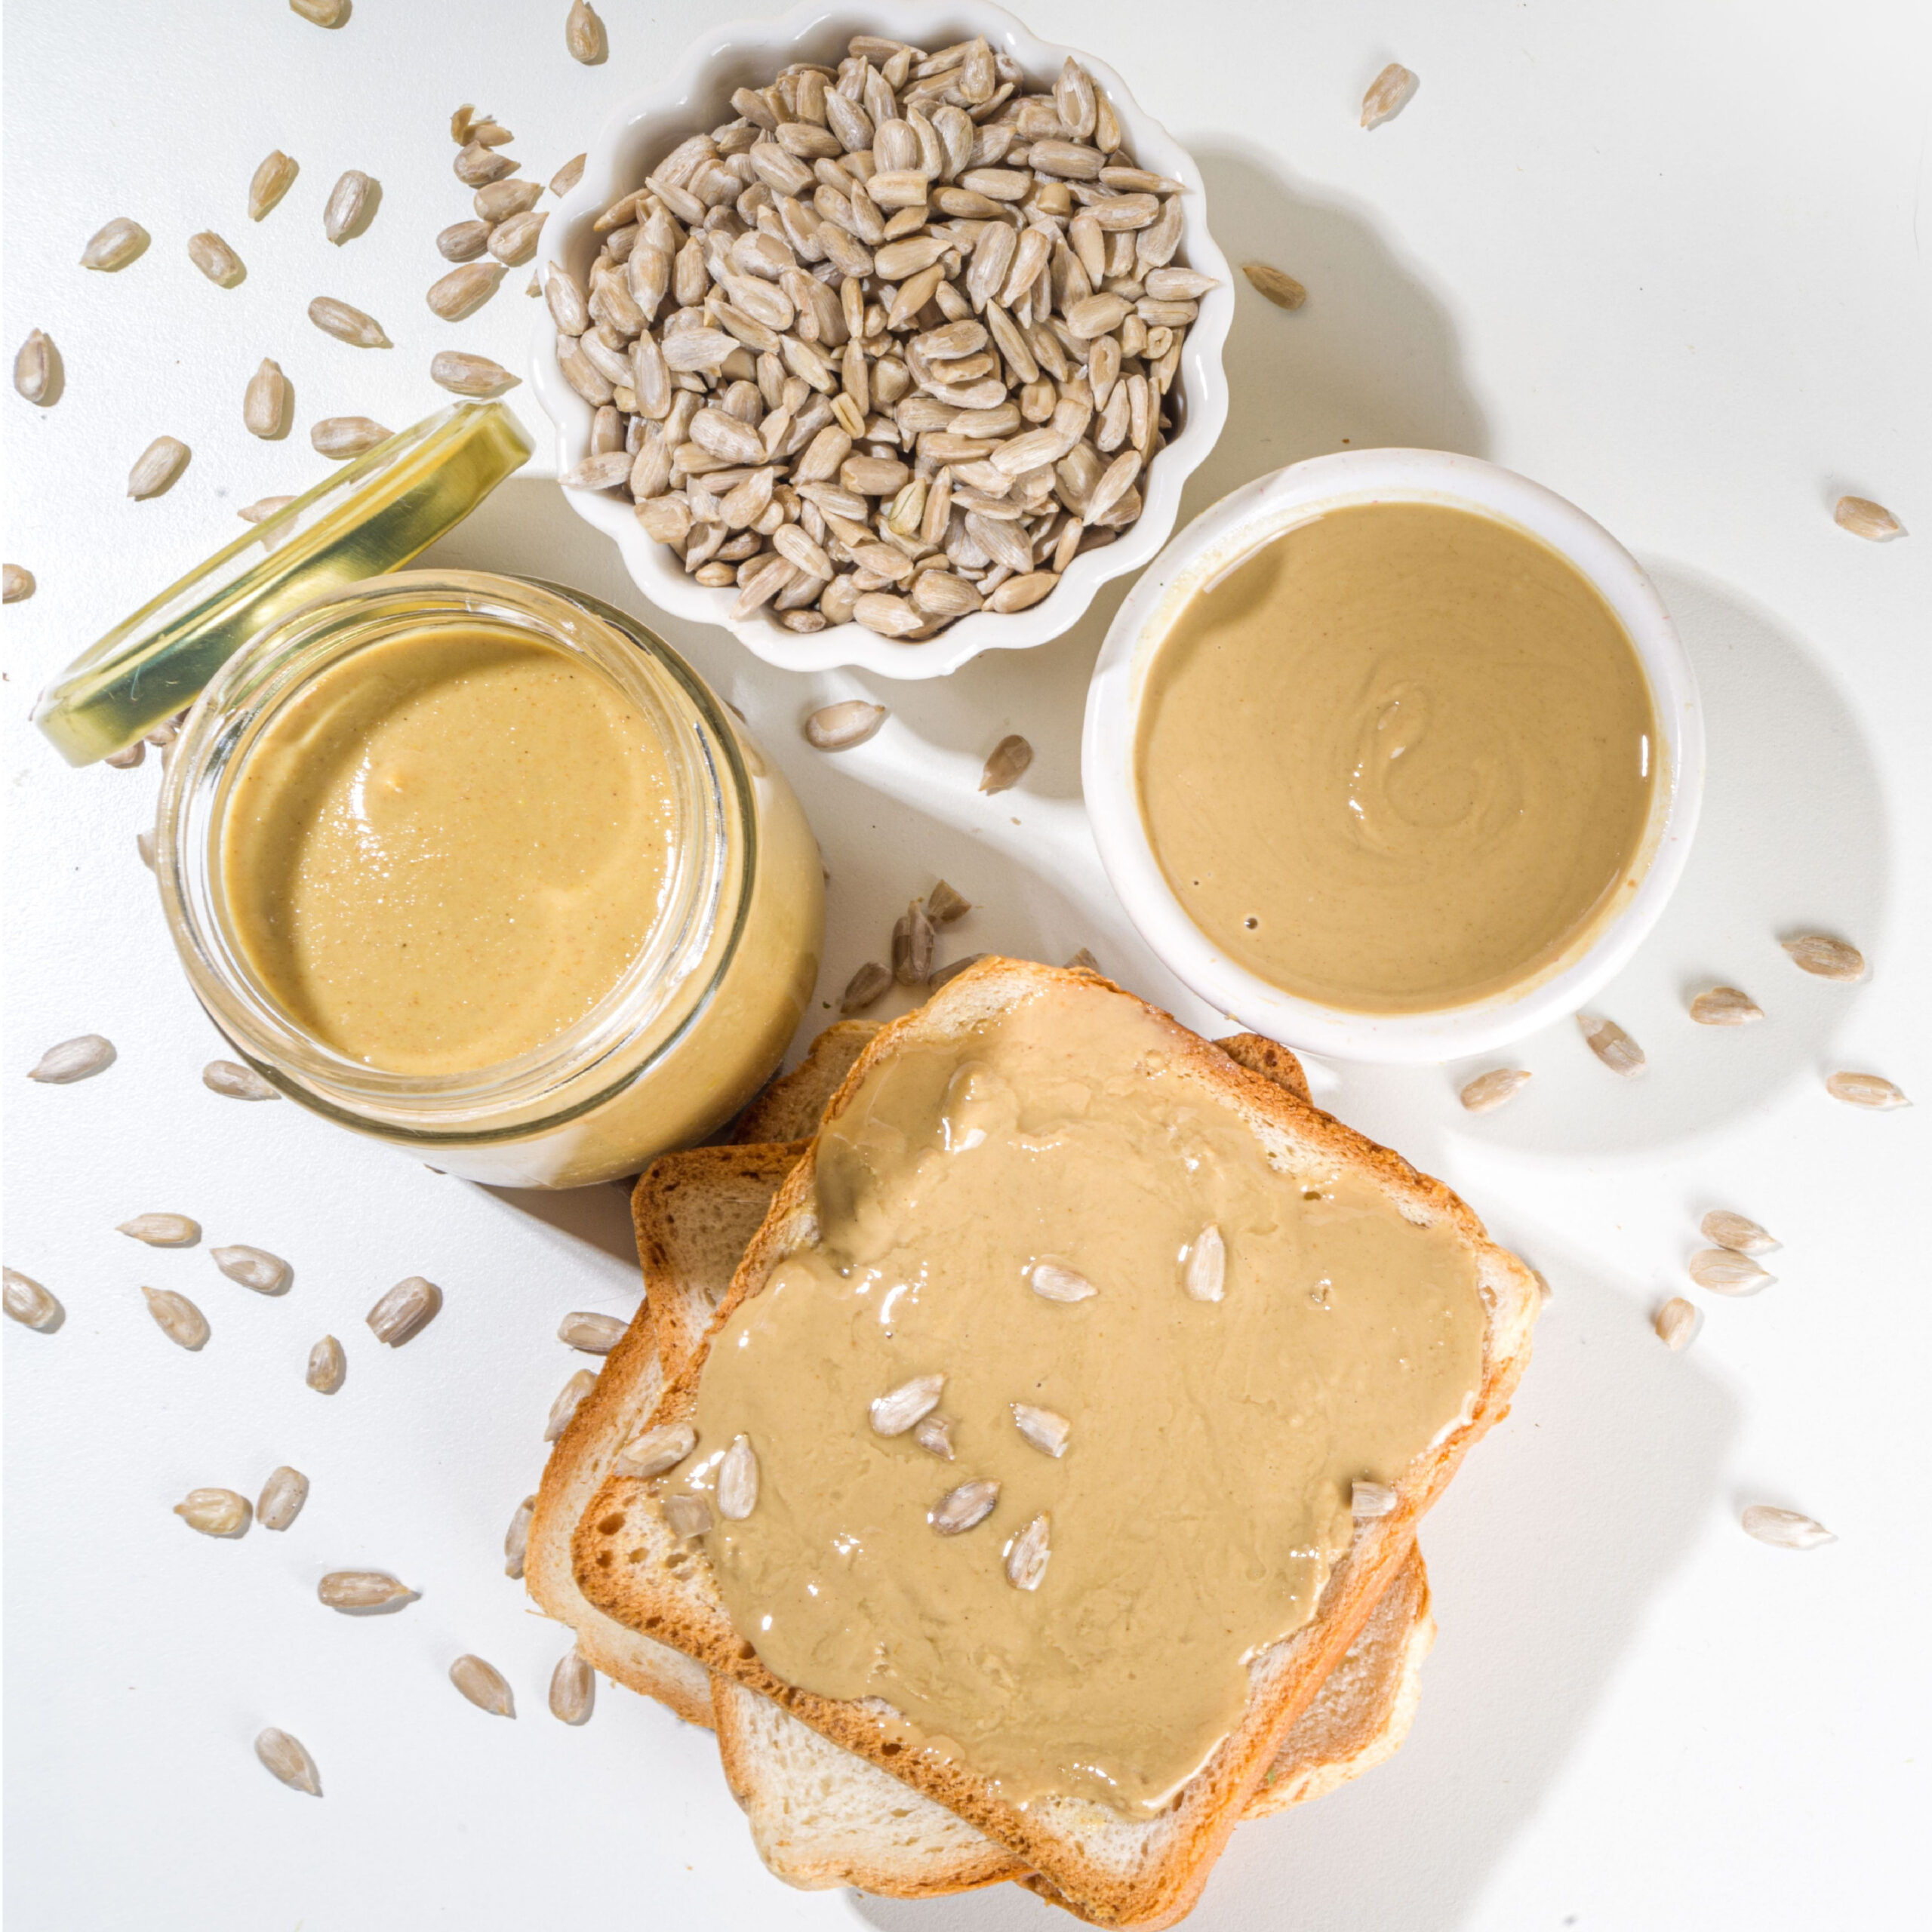 sunflower seed butter on toast beside jar of the butter and bowl of sunflower seeds